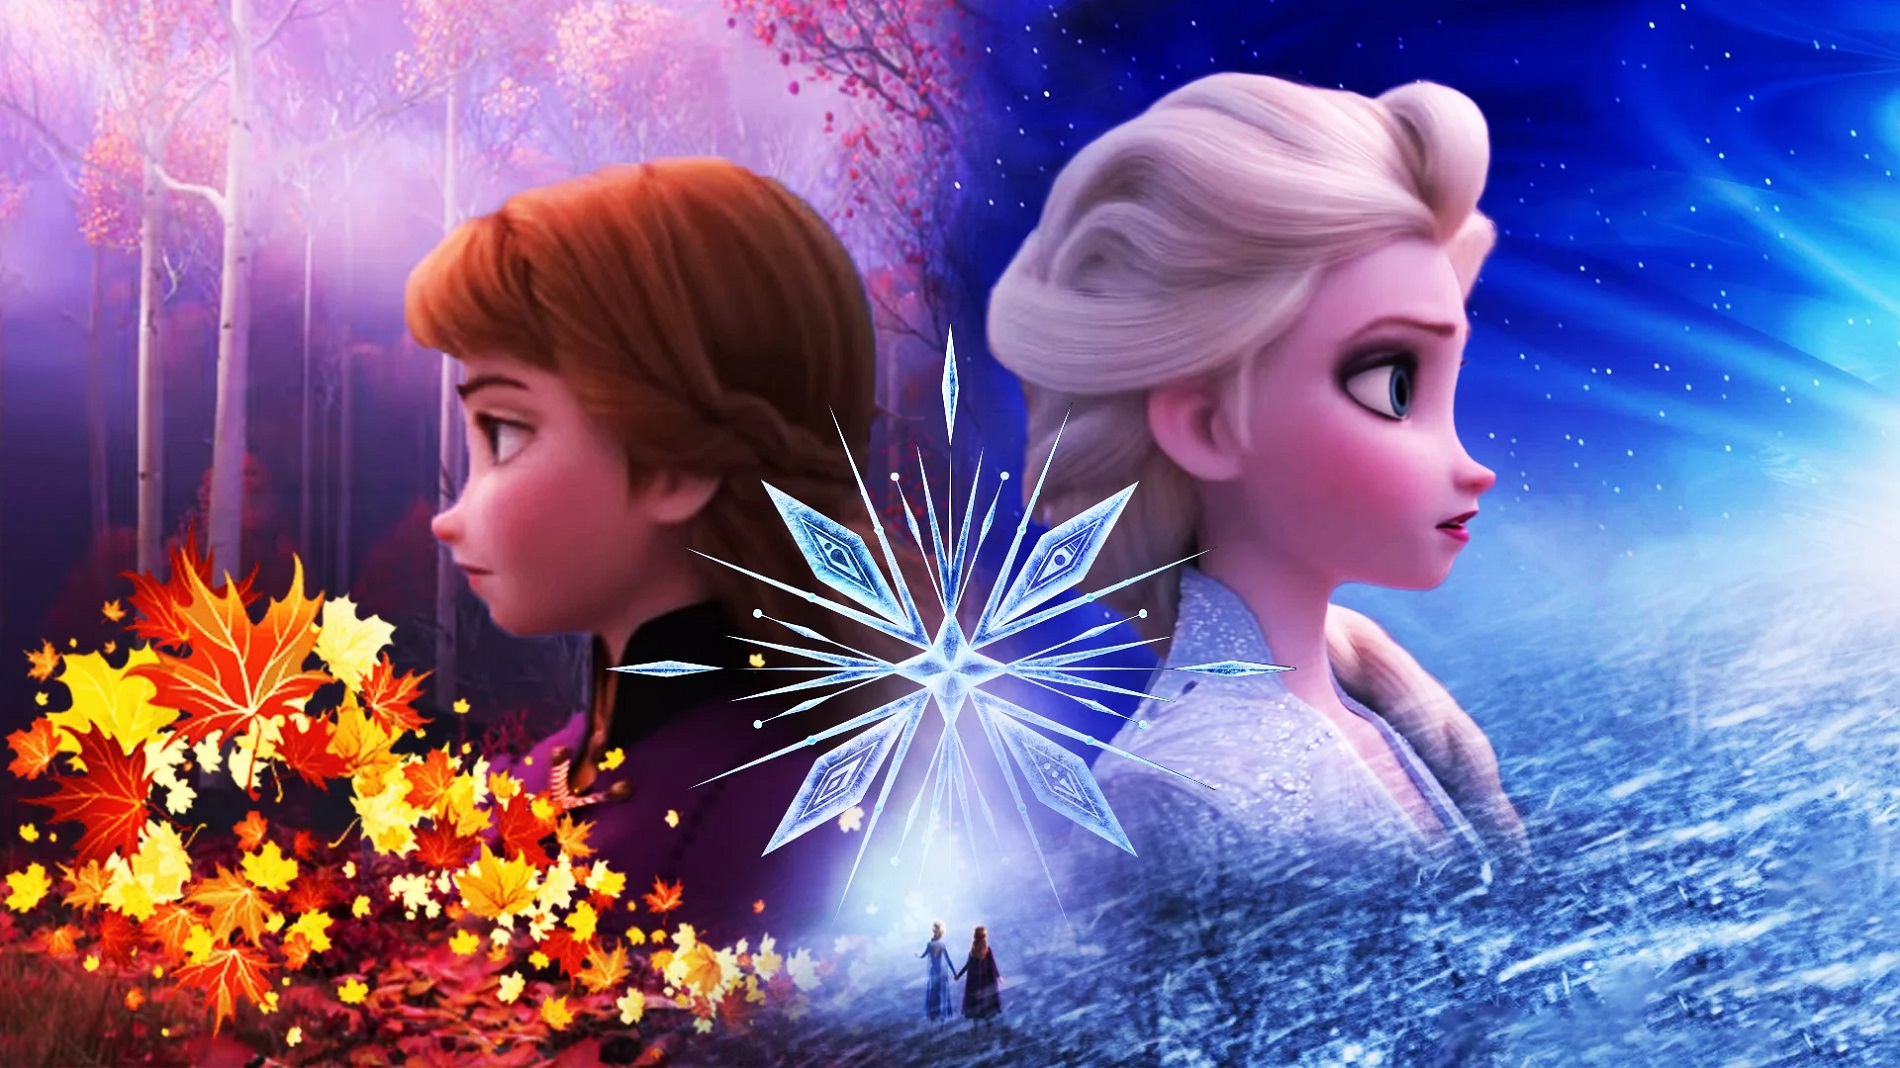 Frozen 3 Can Show A Royal Wedding Of Elsa’s Sister Anna And Kristoff